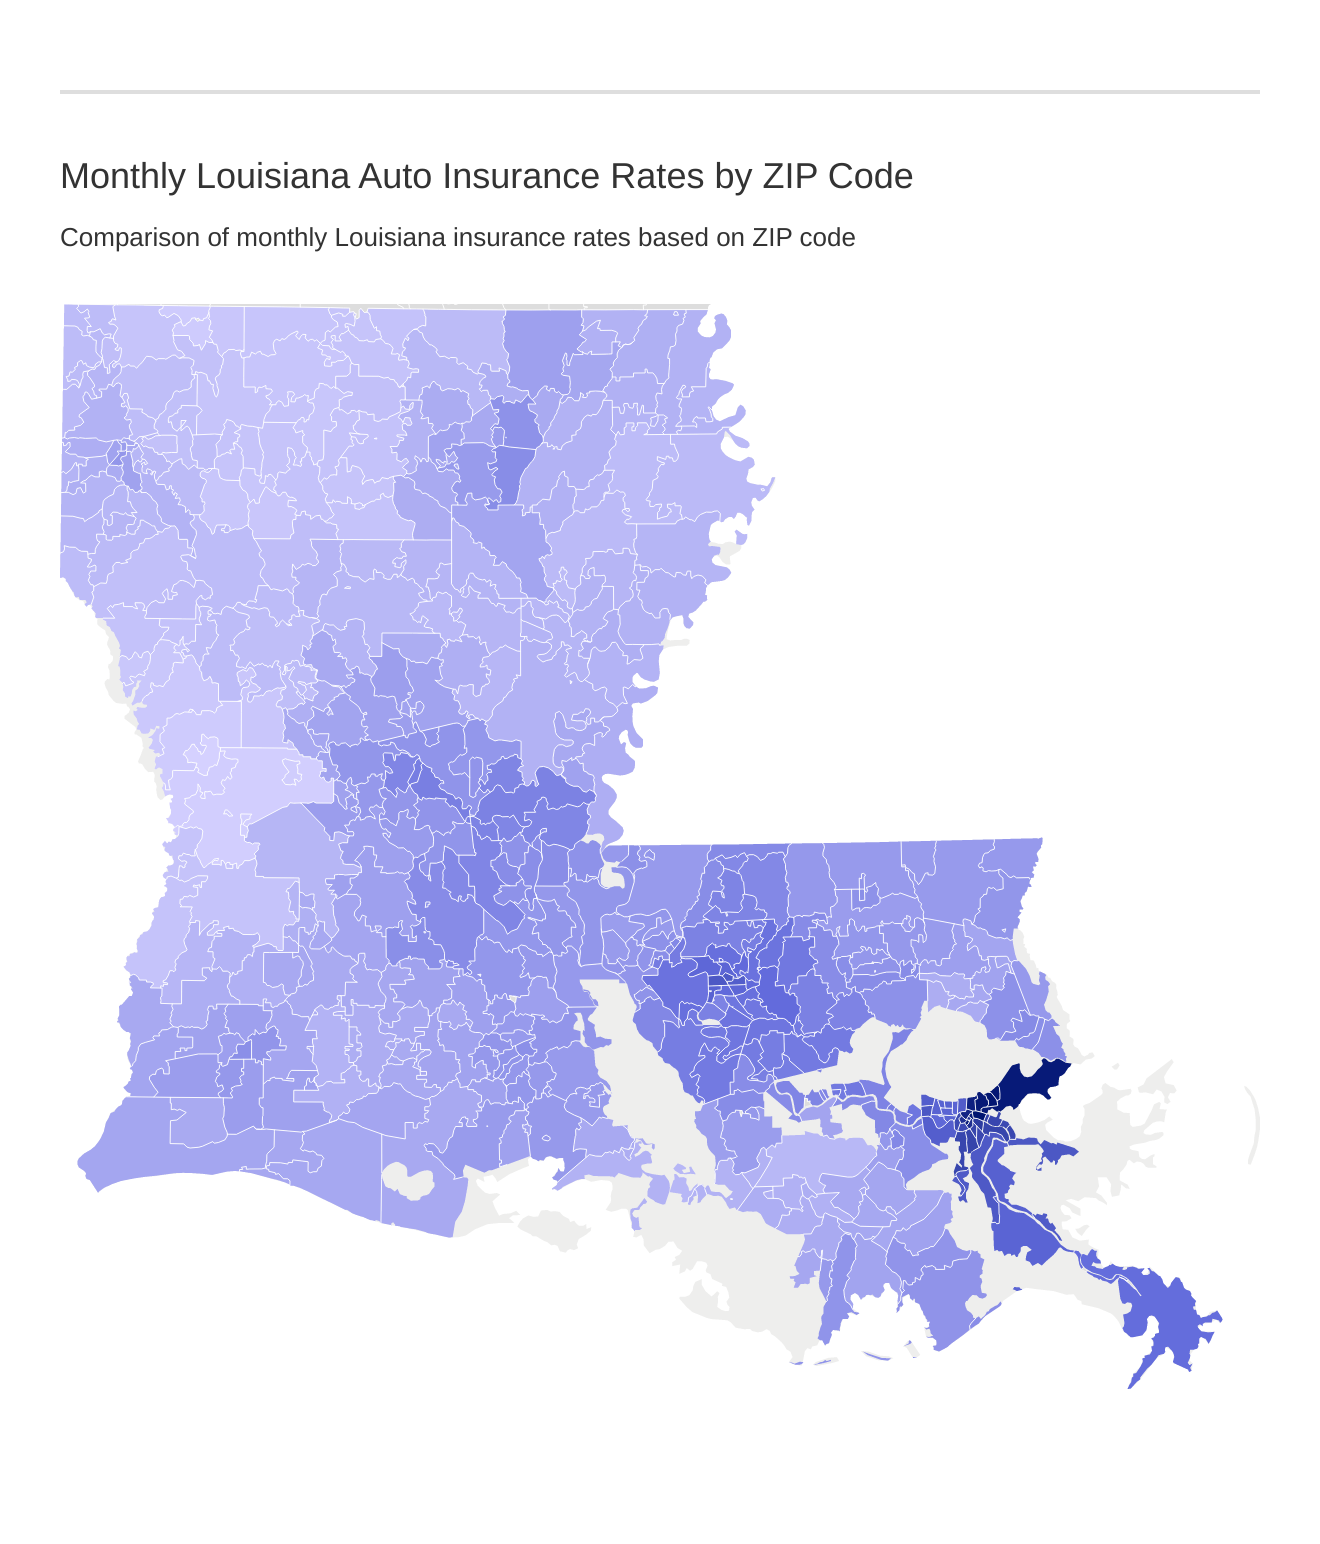 Monthly Louisiana Auto Insurance Rates by ZIP Code